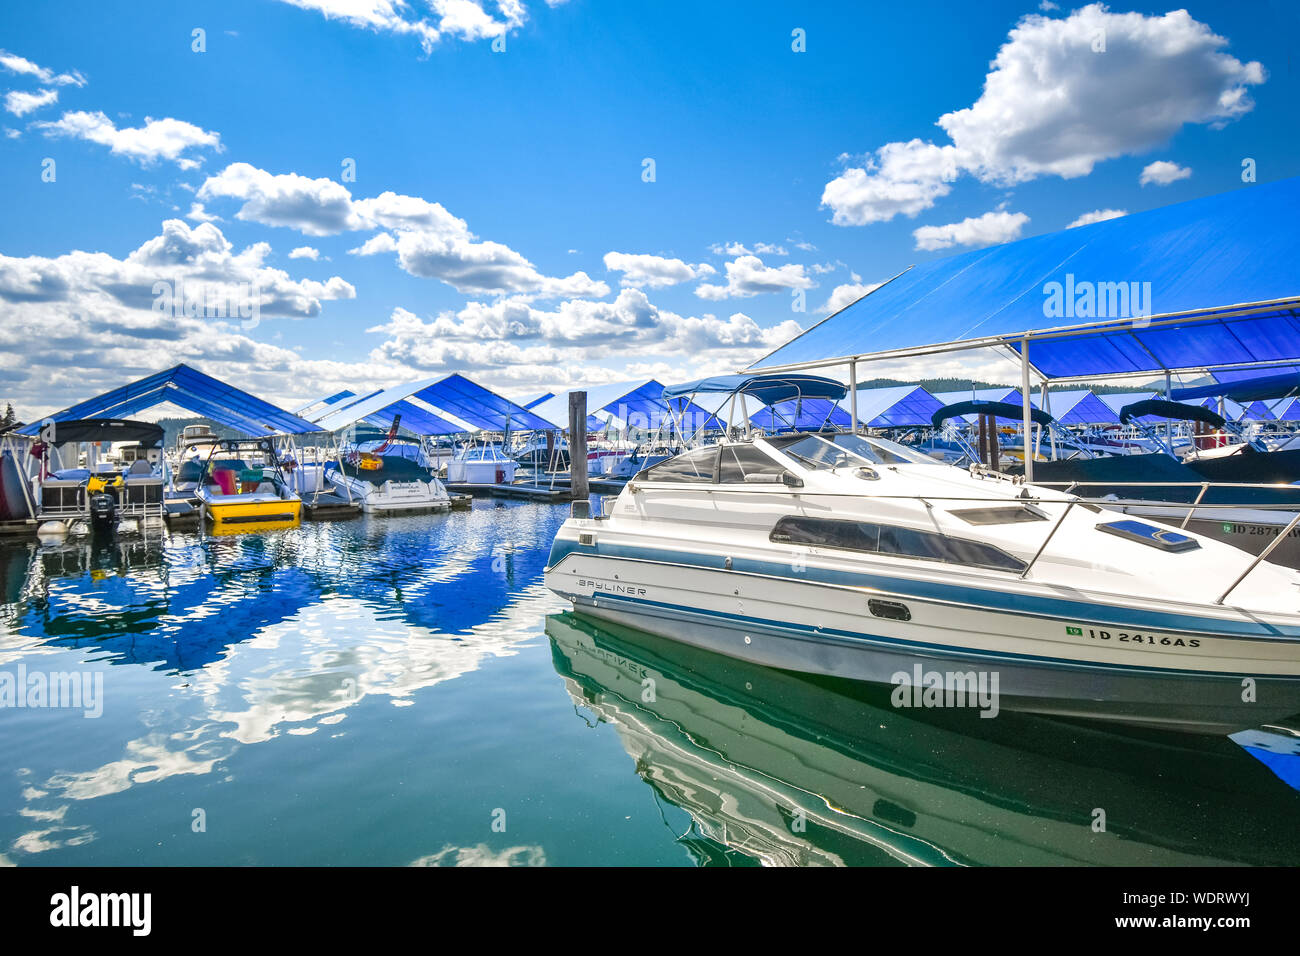 An expensive luxury speedboat sits near covered boat slips filled with boats on the floating boardwalk of the Coeur d'Alene Resort Stock Photo